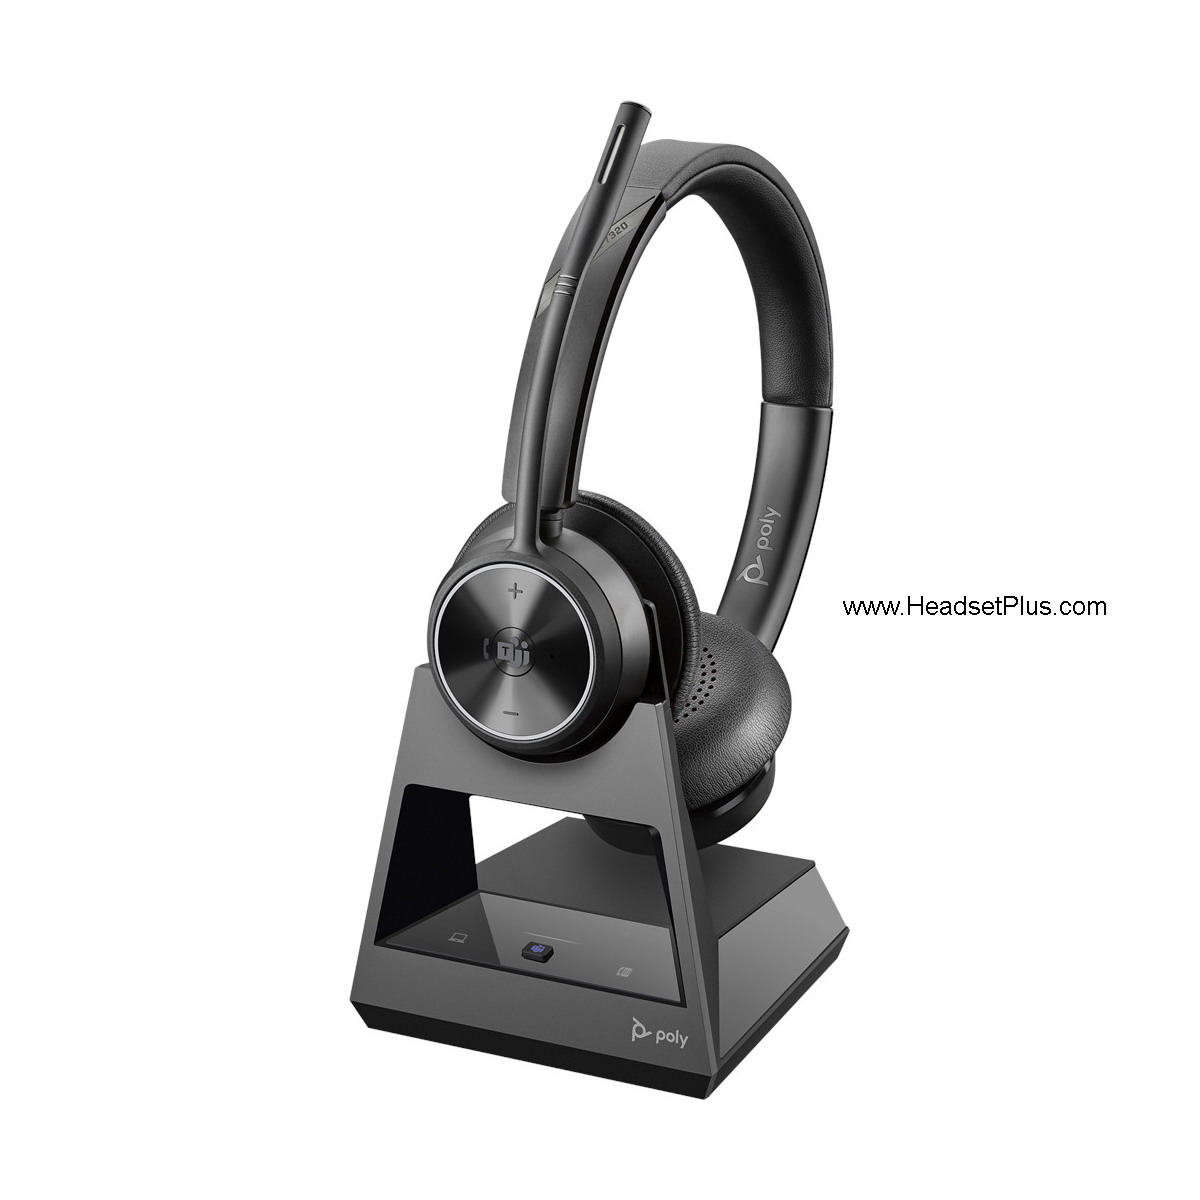 poly savi 7320-m office stereo wireless headset, ms teams cert view